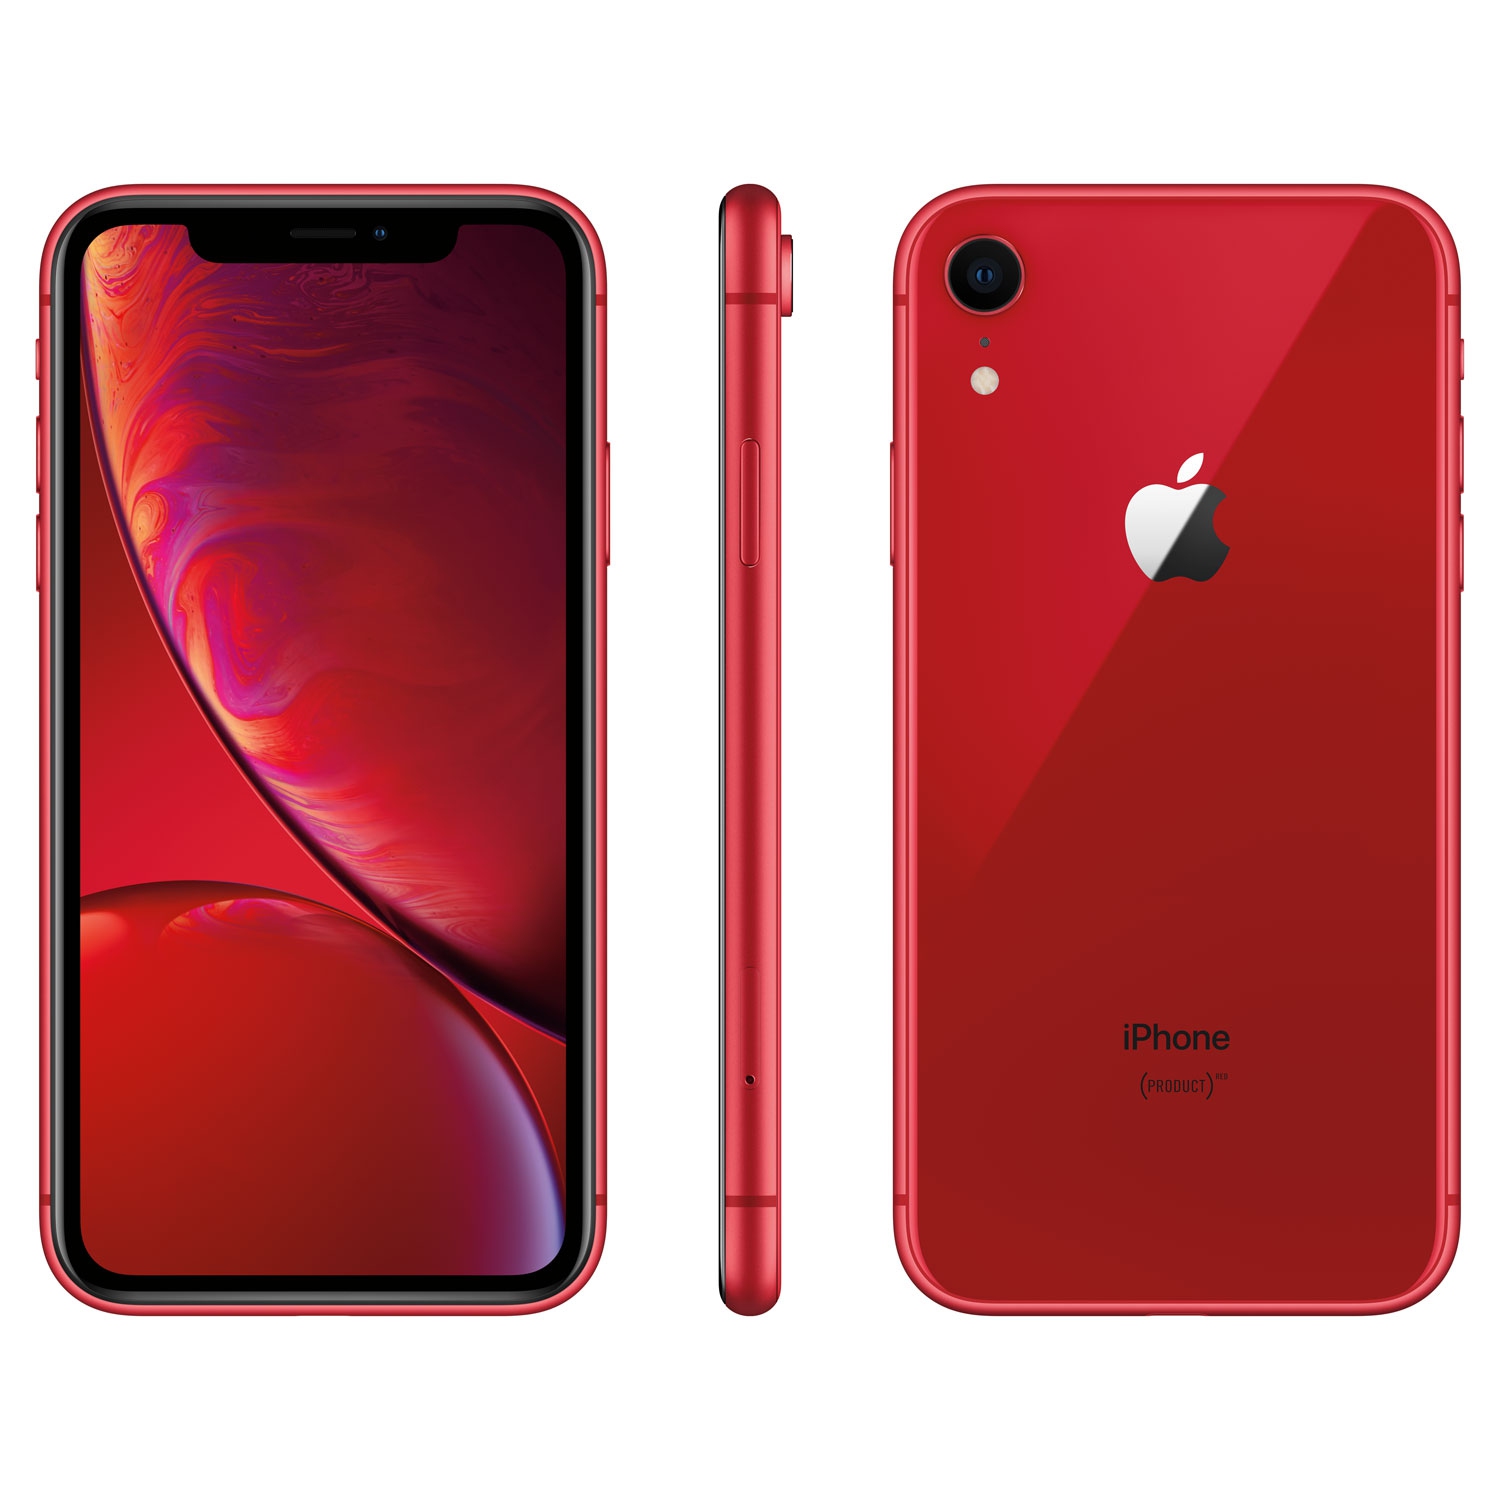 Apple iPhone XR 64GB Smartphone - (Product)RED - Unlocked - Open Box